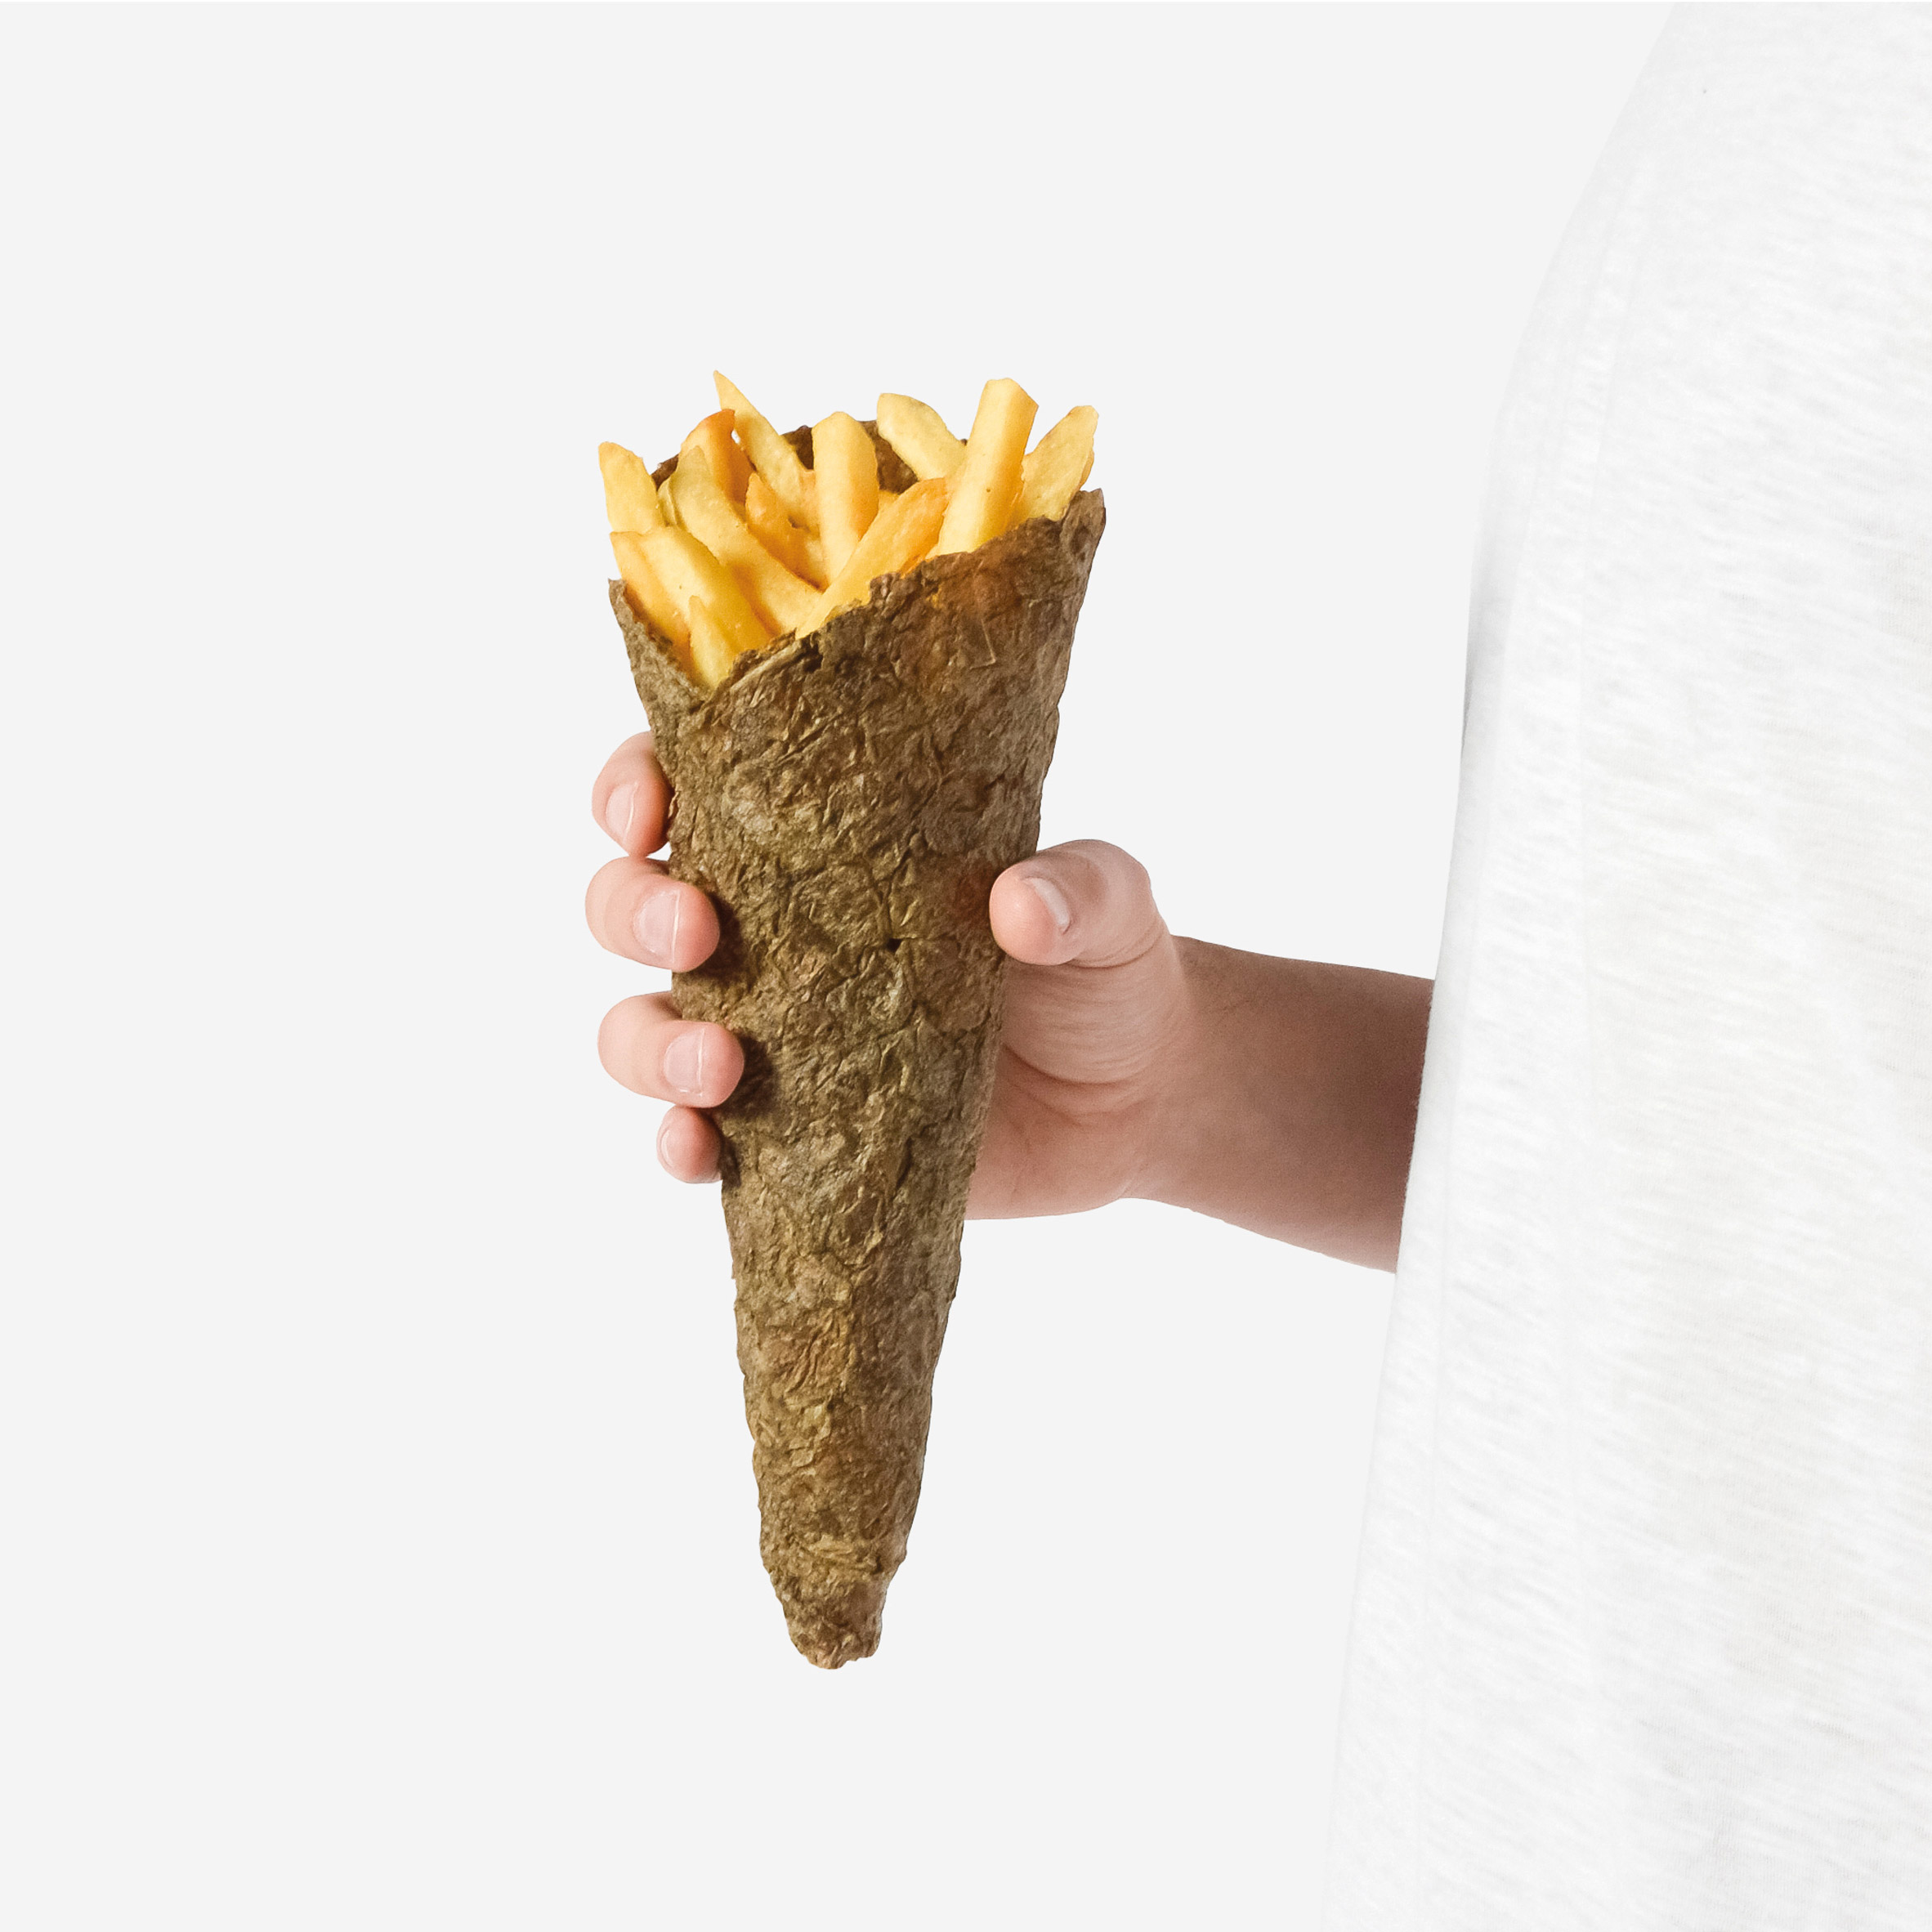 Peel Saver is an ecological packaging for fries made from potato skins